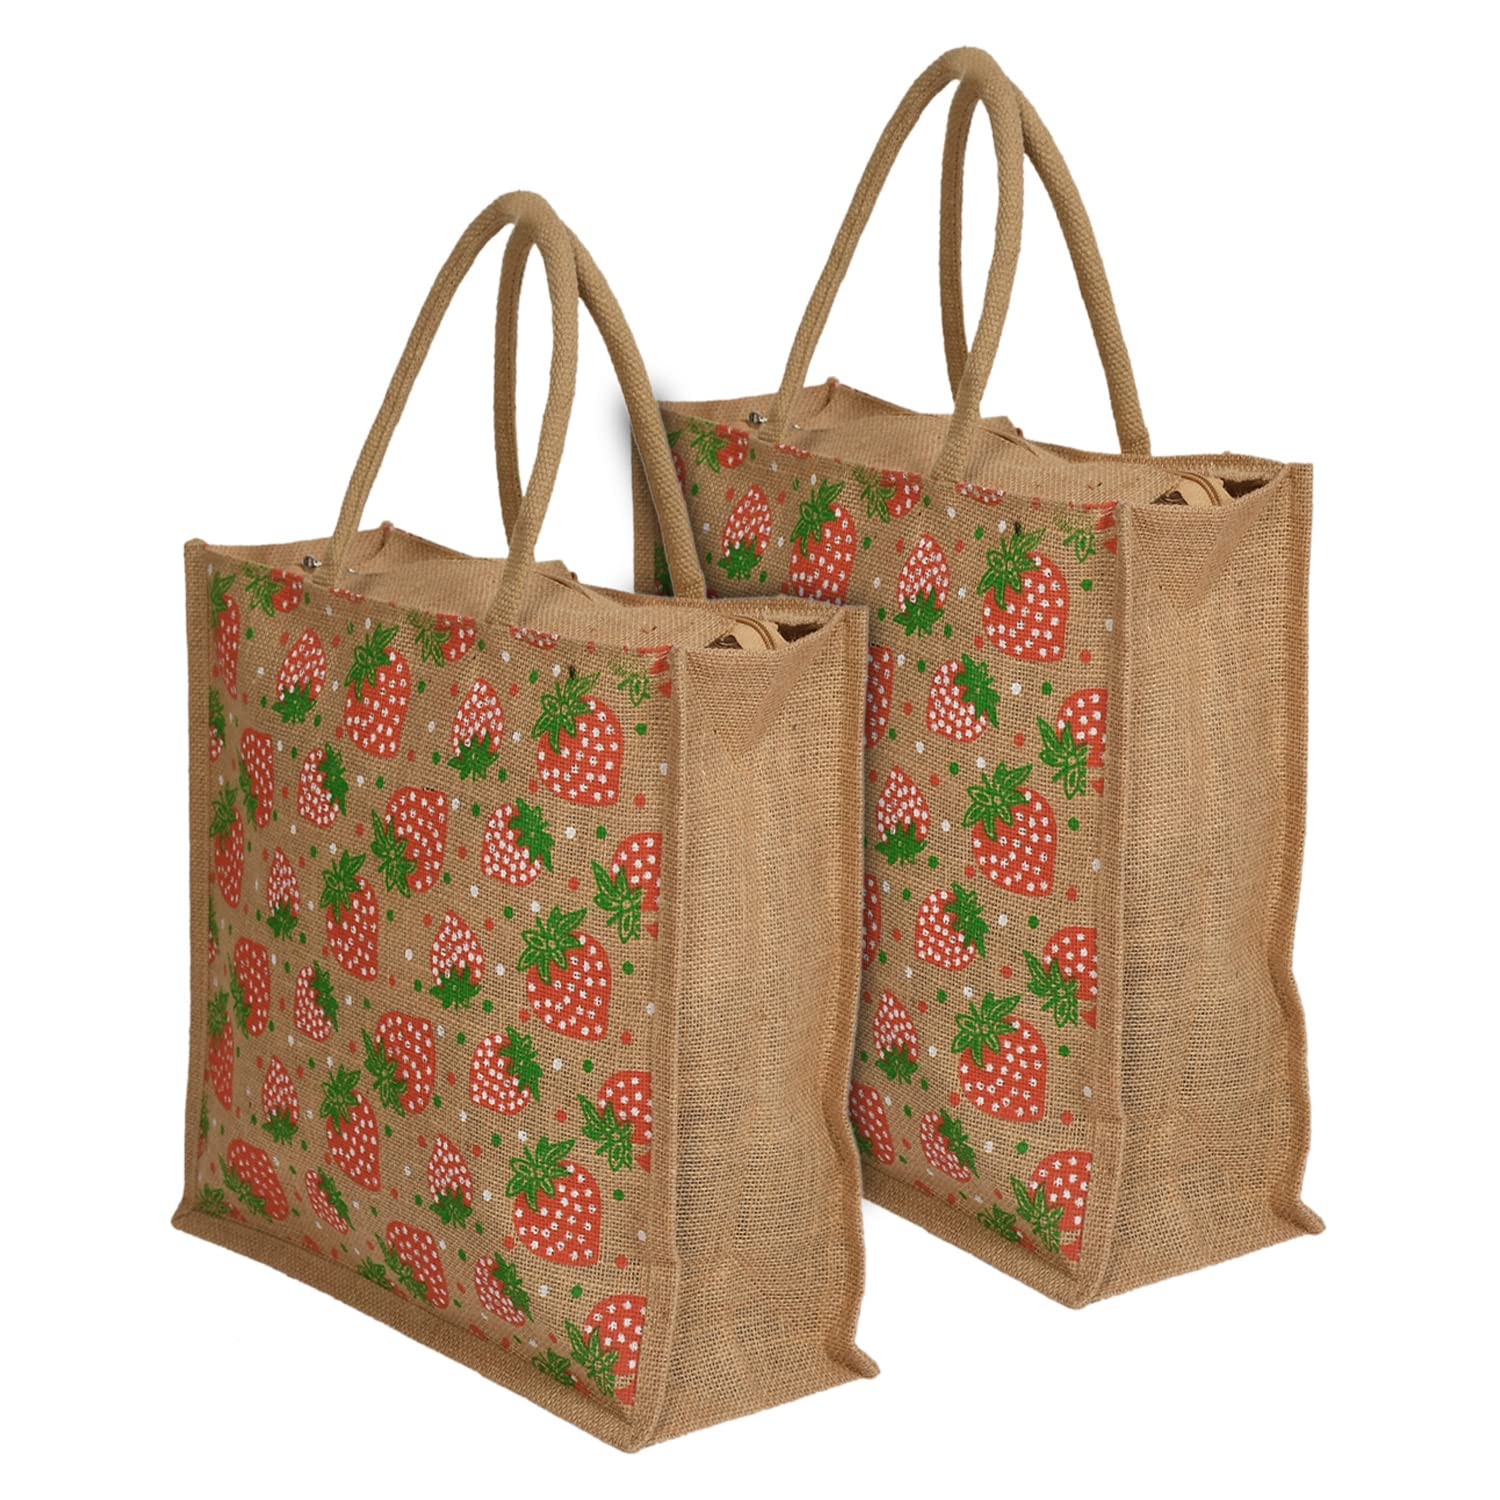 Kuber Industries Shopping Bag|Jute Eco-Friendly & Reusable Grocery Bag|Hand Bag Strawberry Print With Zip & Handle for Daily Use|16x15 Inch (Brown)